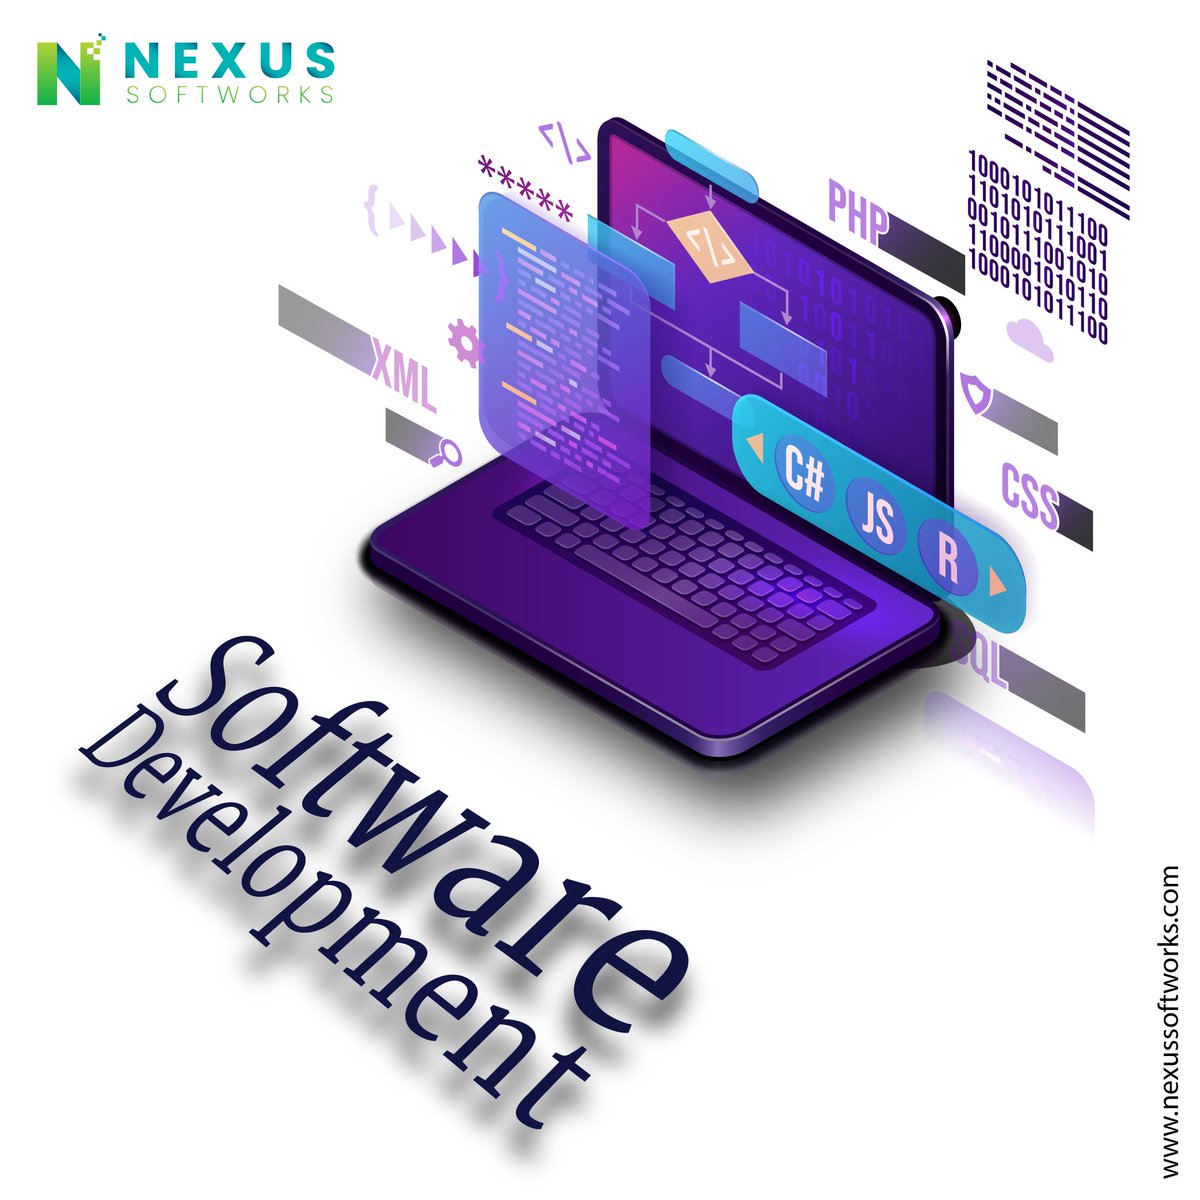 Software development involves creating, designing, testing, and maintaining computer programs and applications. It spans conceptualization, planning, coding, testing, deployment, and maintenance.
.
.
#nexussoftworks #DigitalTransformation #softwaredev #testing #designing 💹🖥〽♨